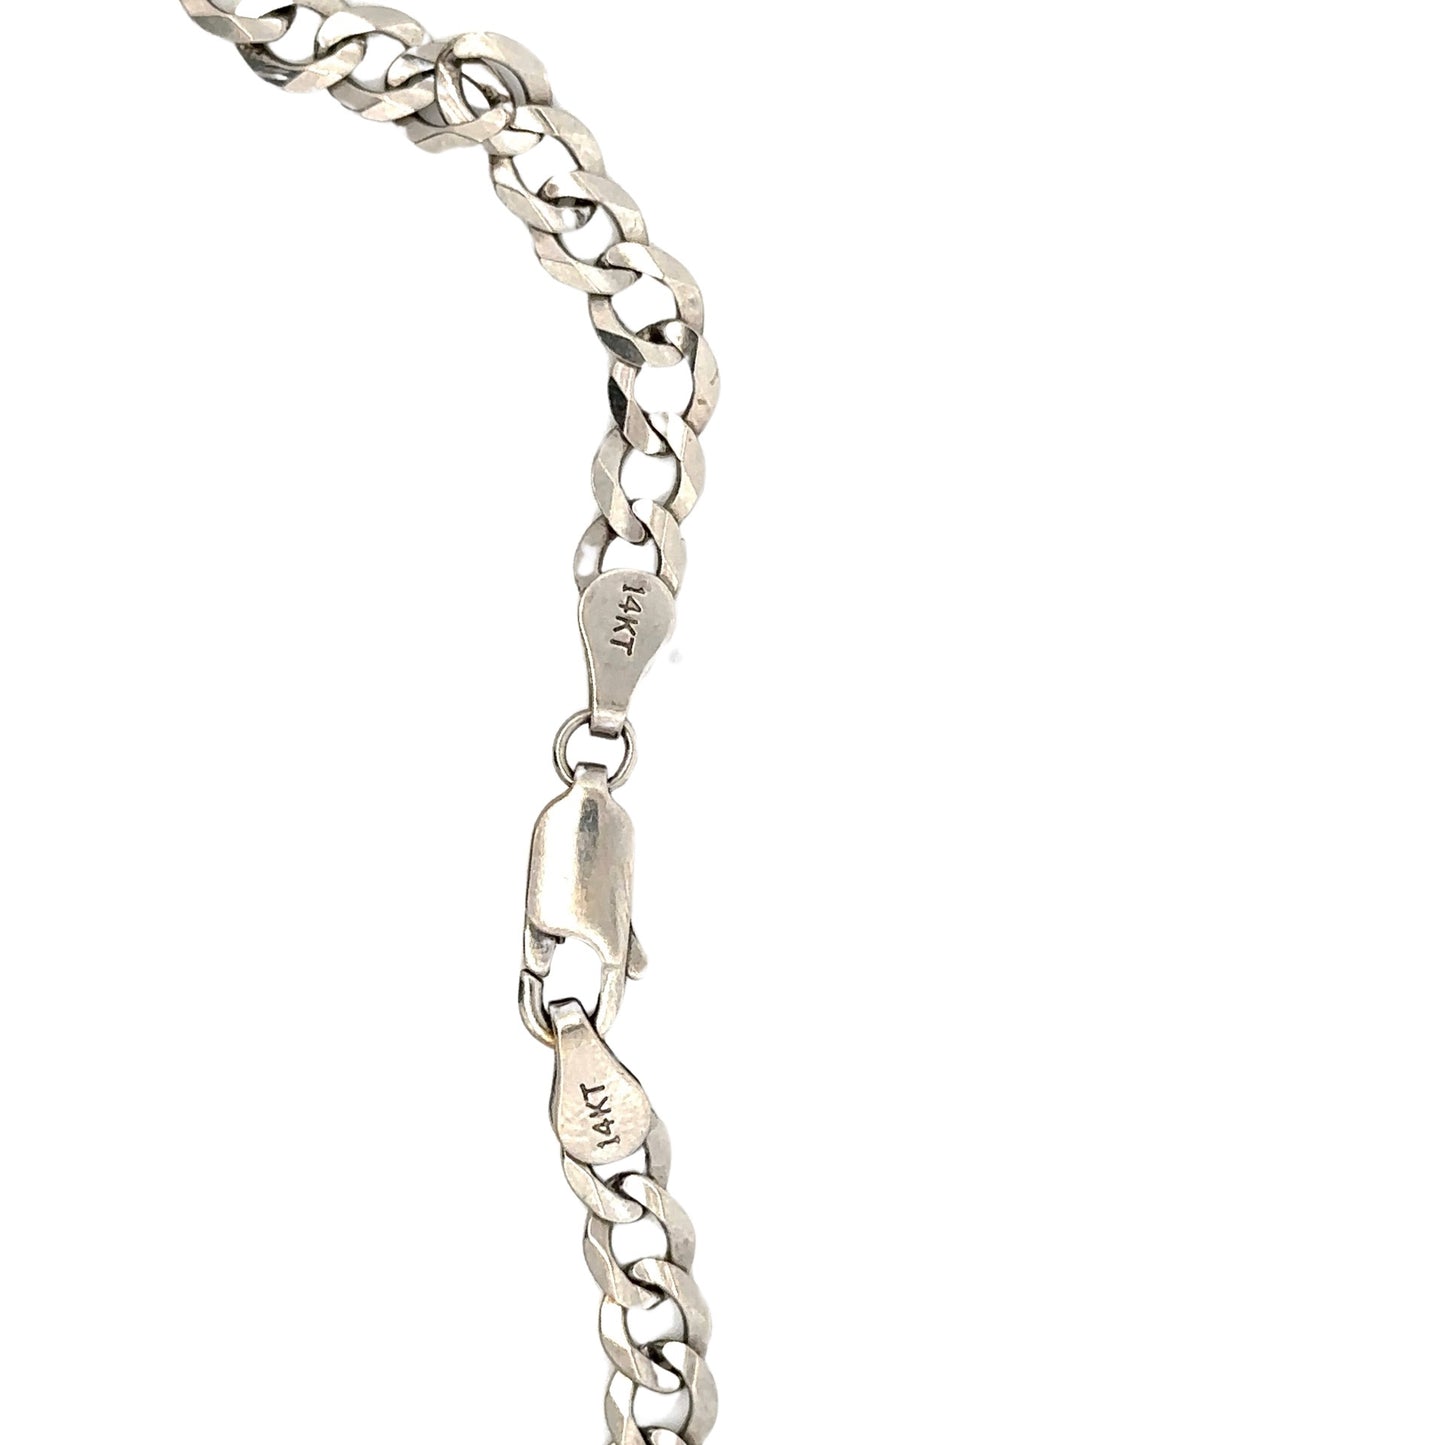 Lobster Clasp showing 14K on White Gold Link Chain. Some scratches on clasp.